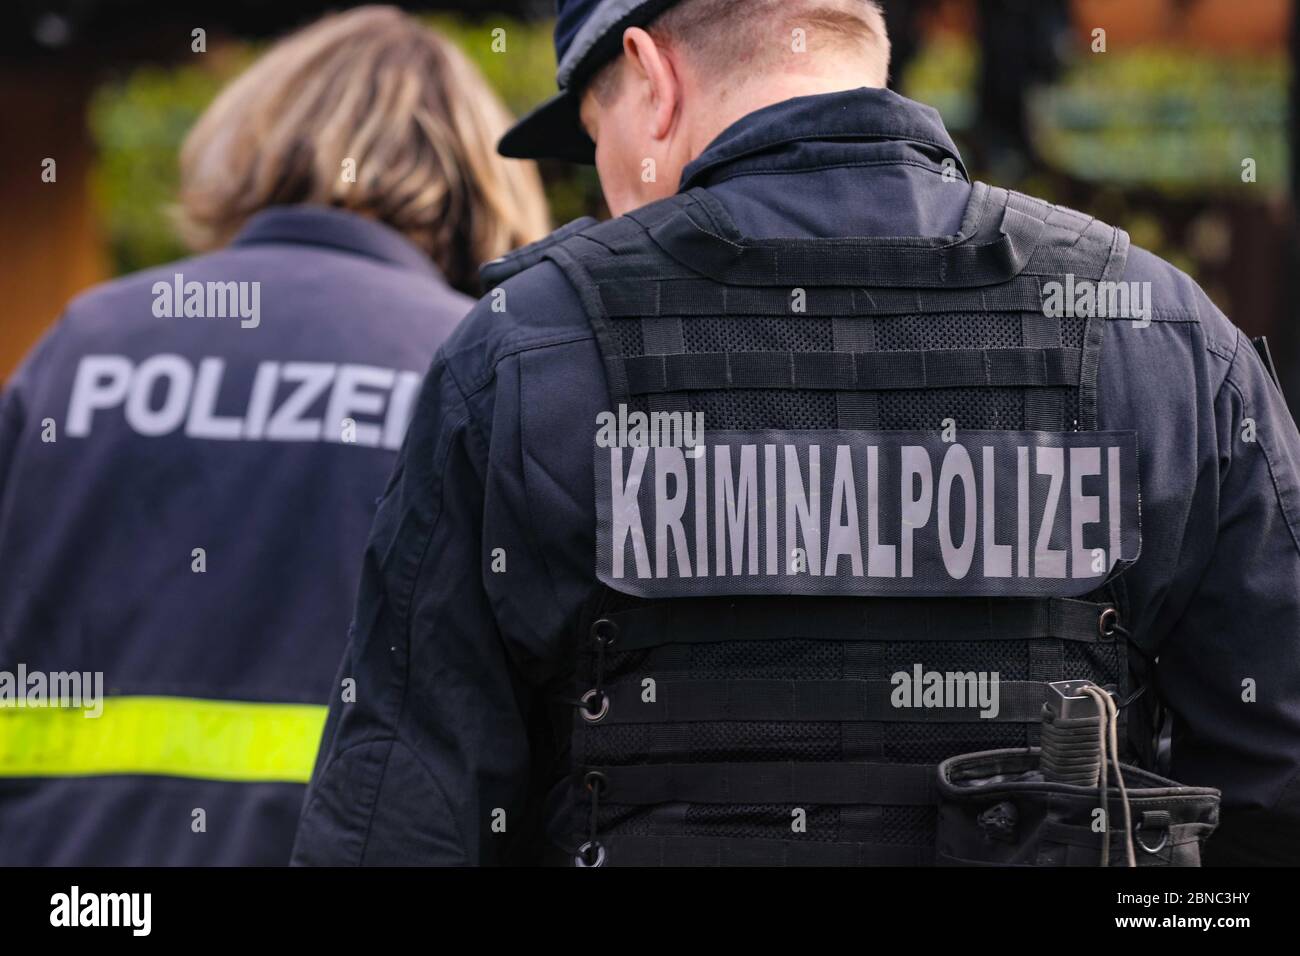 Dresden, Germany. 13th May, 2020. Two police officers from behind with the inscription "Kriminalpolizei und Polizei" on their backs stand shifted at the scene of action. Credit: Tino Plunert/dpa-Zentralbild/ZB/dpa/Alamy Live News Stock Photo